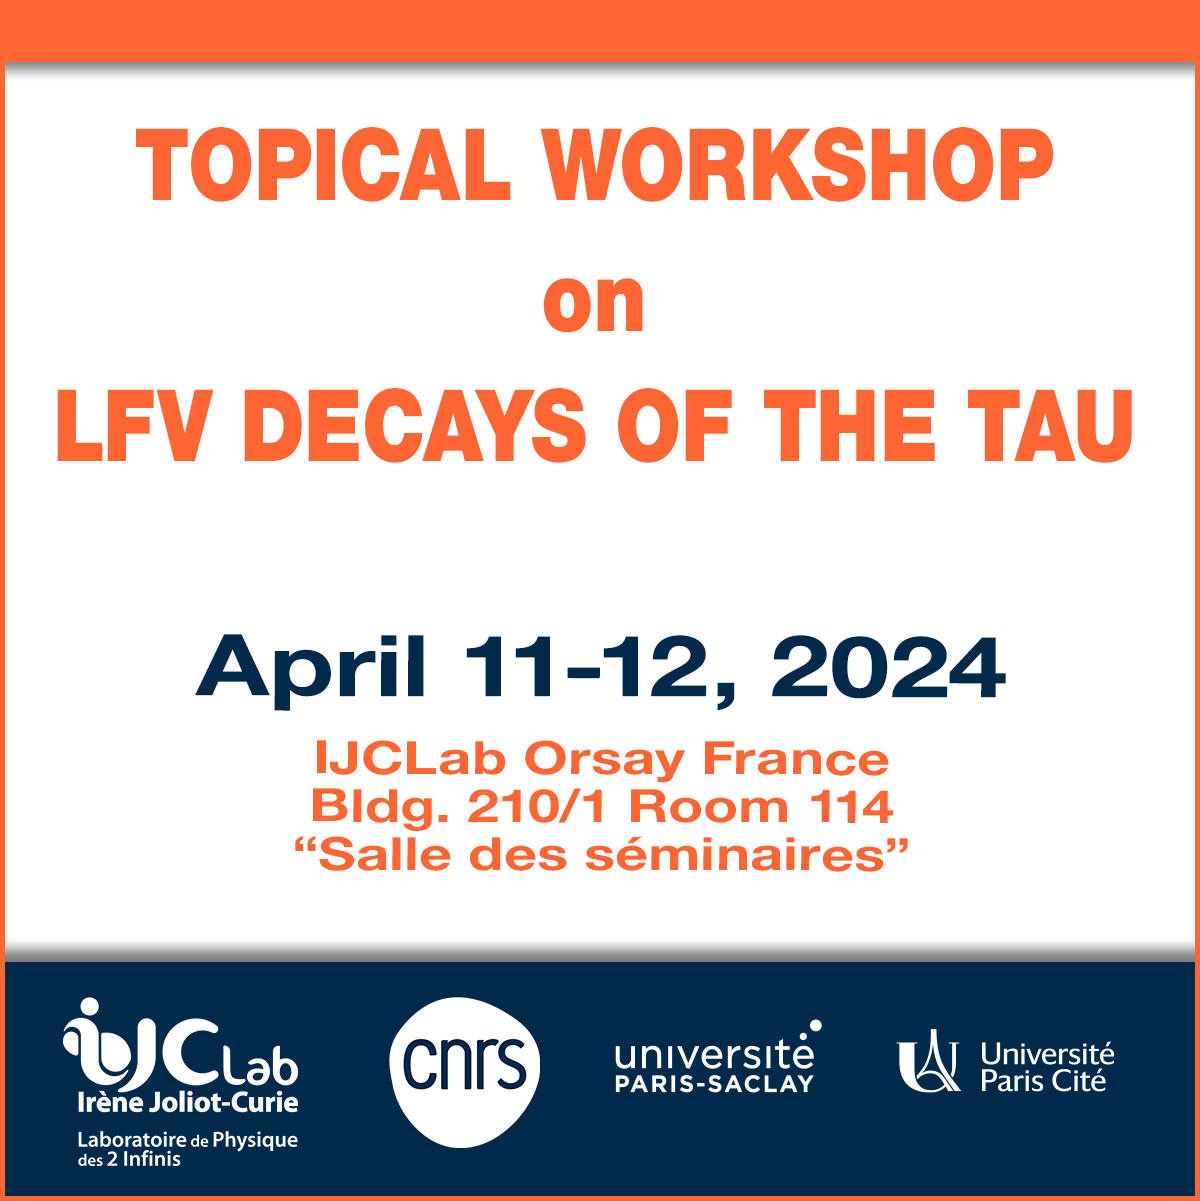 Topical workshop on LFV decays of the tau